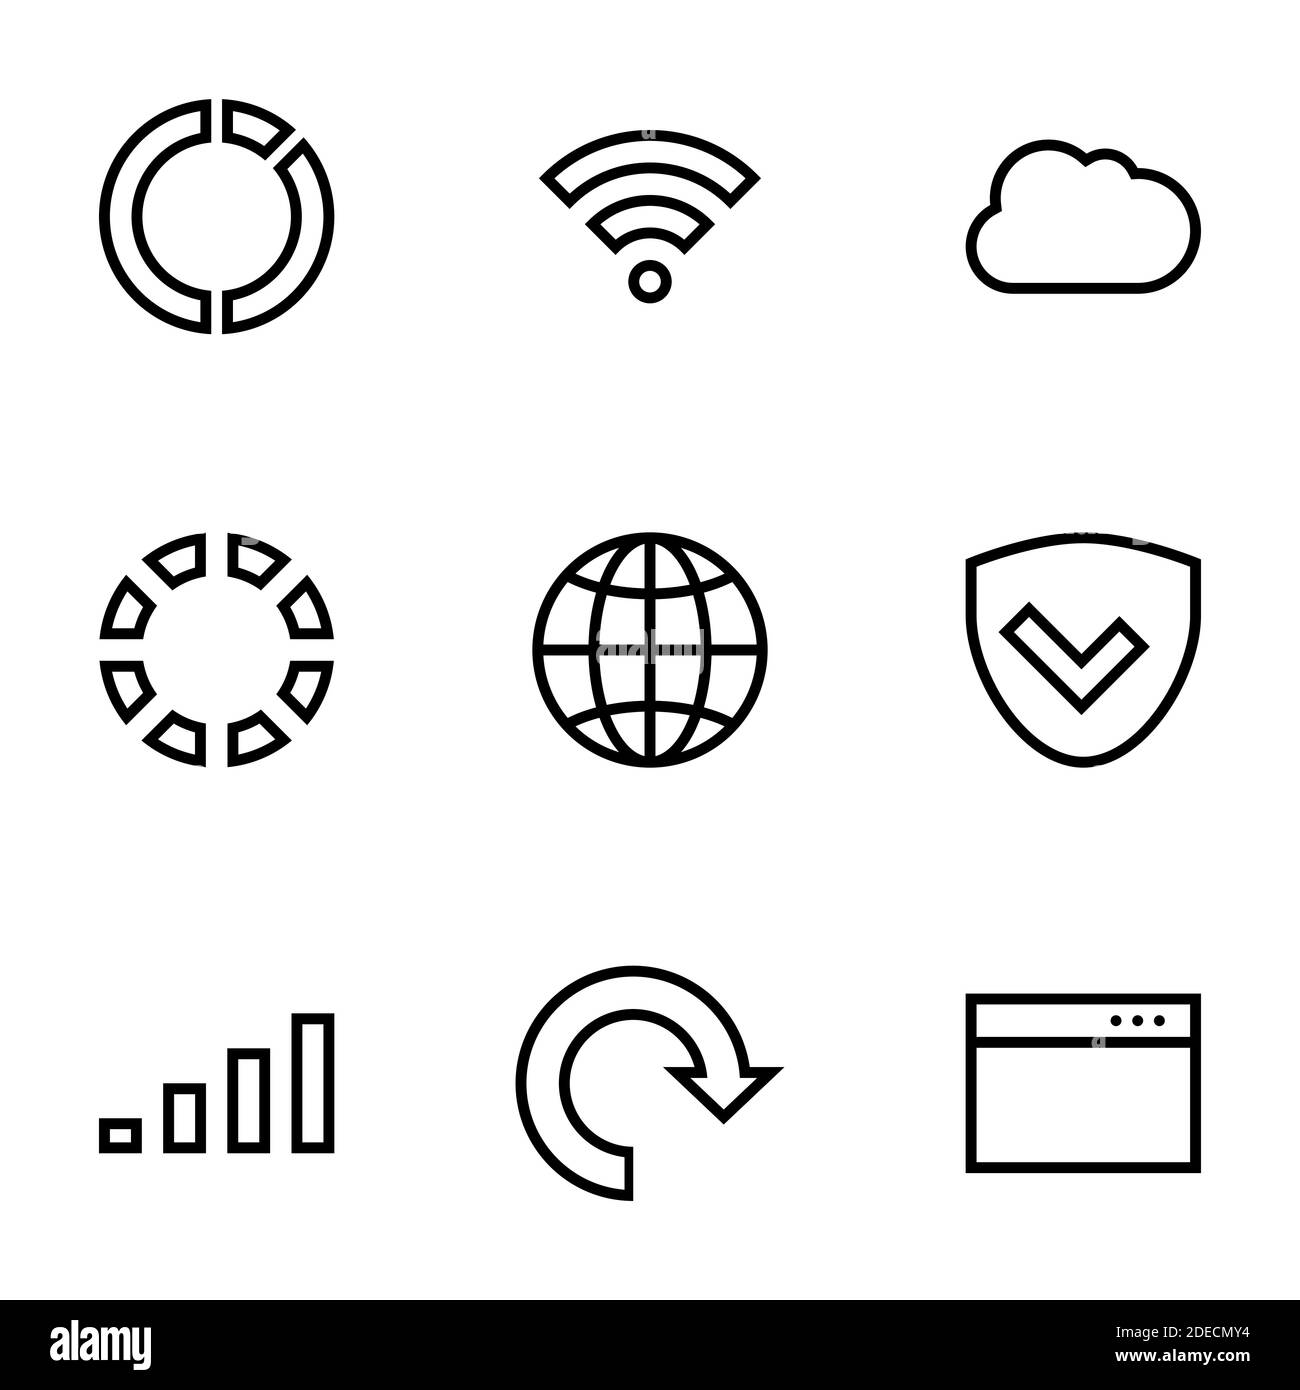 Set of simple icons on a theme Web, internet, communication, linear , vector, set. White background Stock Vector